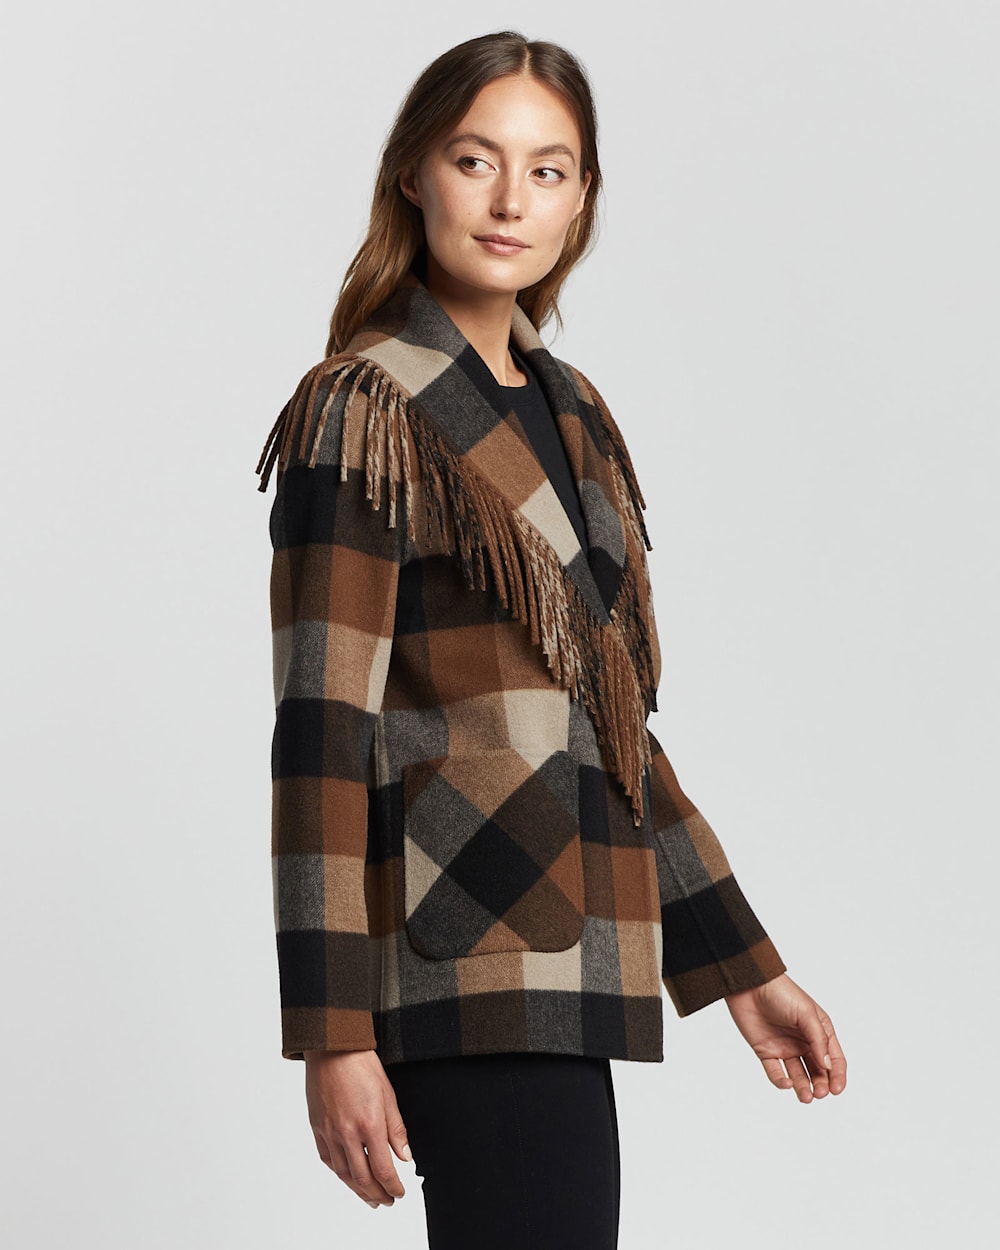 ALTERNATE VIEW OF WOMEN'S CHEYENNE FRINGED SHAWL-COLLAR COAT IN CAMEL/CHARCOAL PLAID image number 3